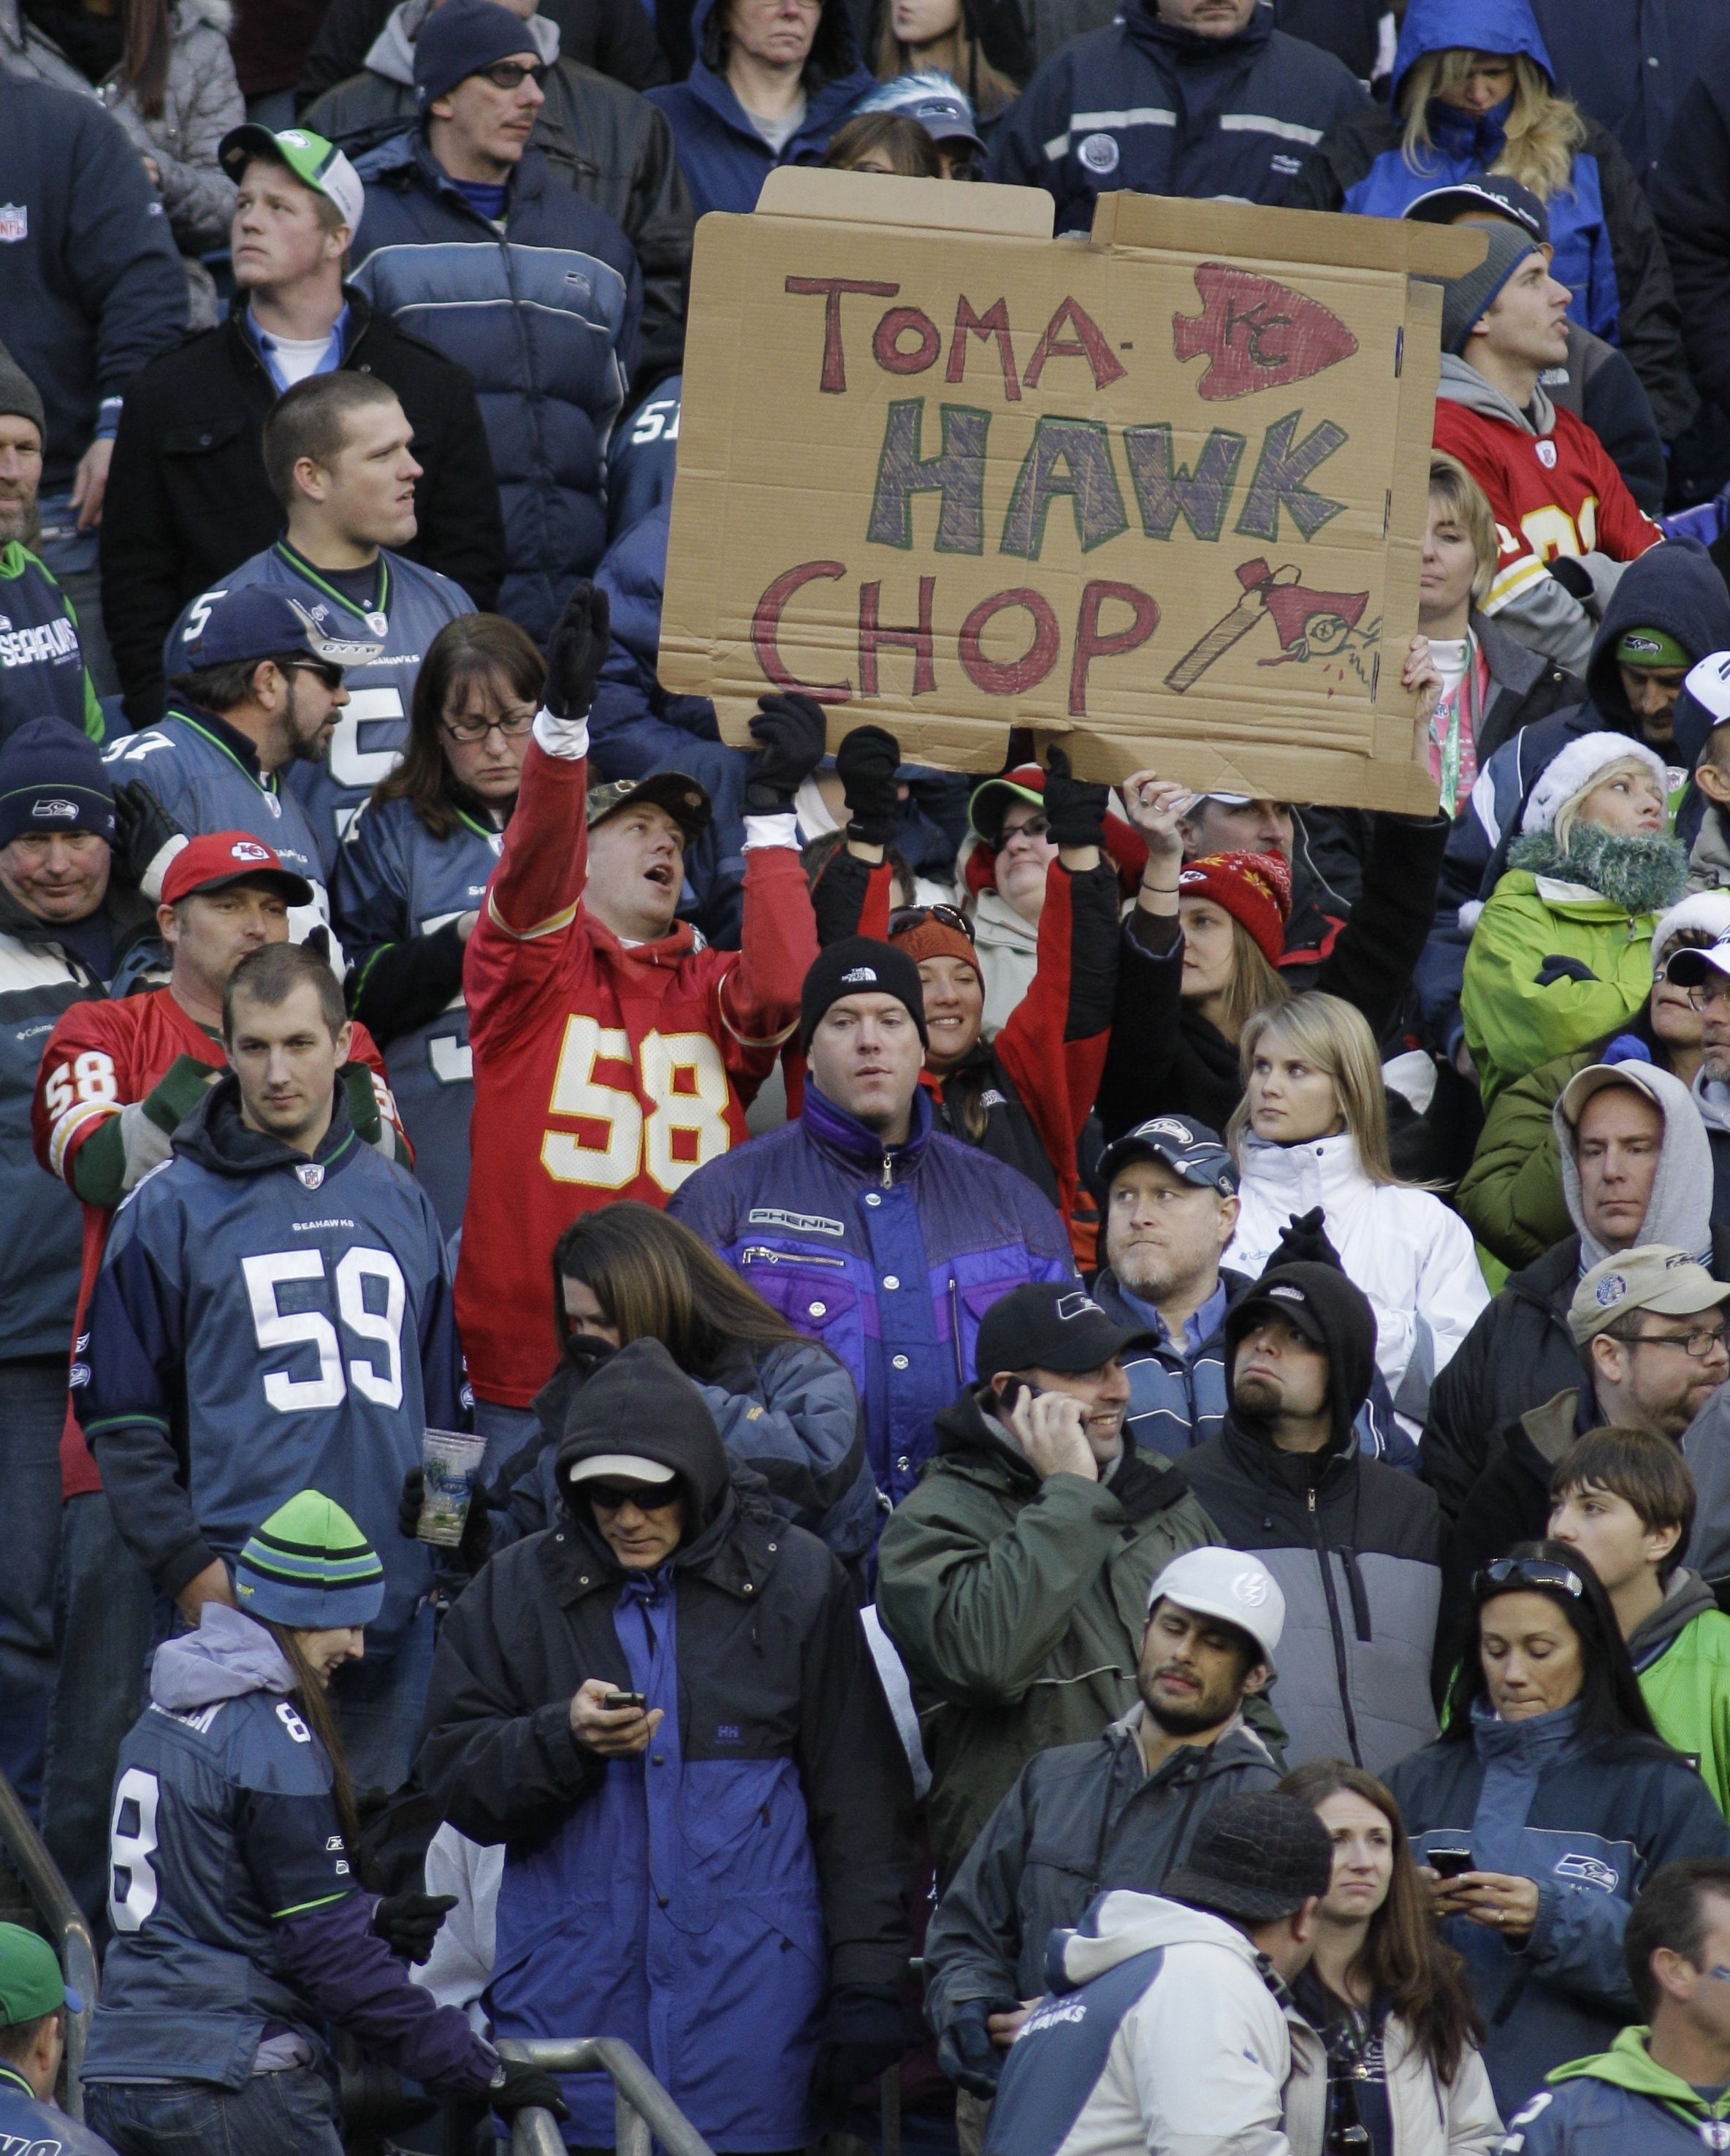 Columnist Slams Chiefs for Controversial Tomahawk Chop Gesture